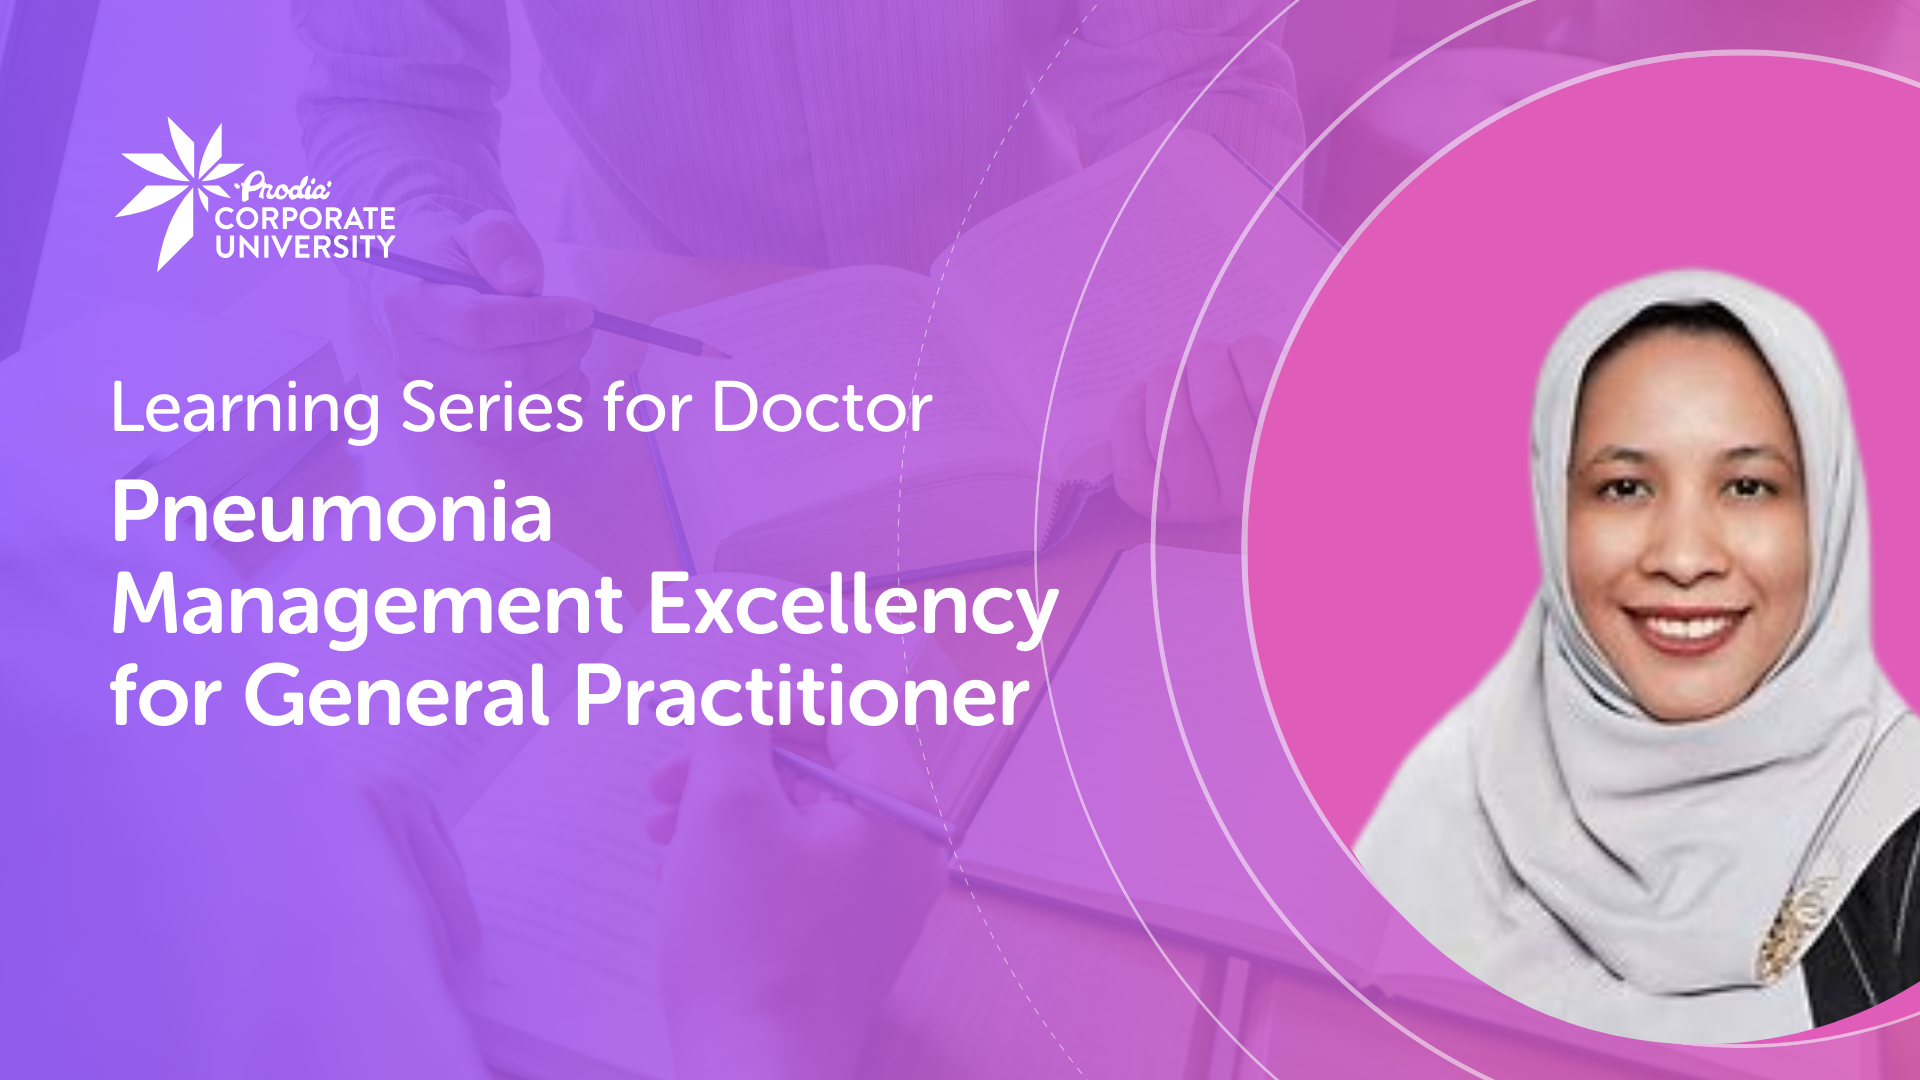 Learning Series for Doctor - Pneumonia Management Excellency for General Practitioner